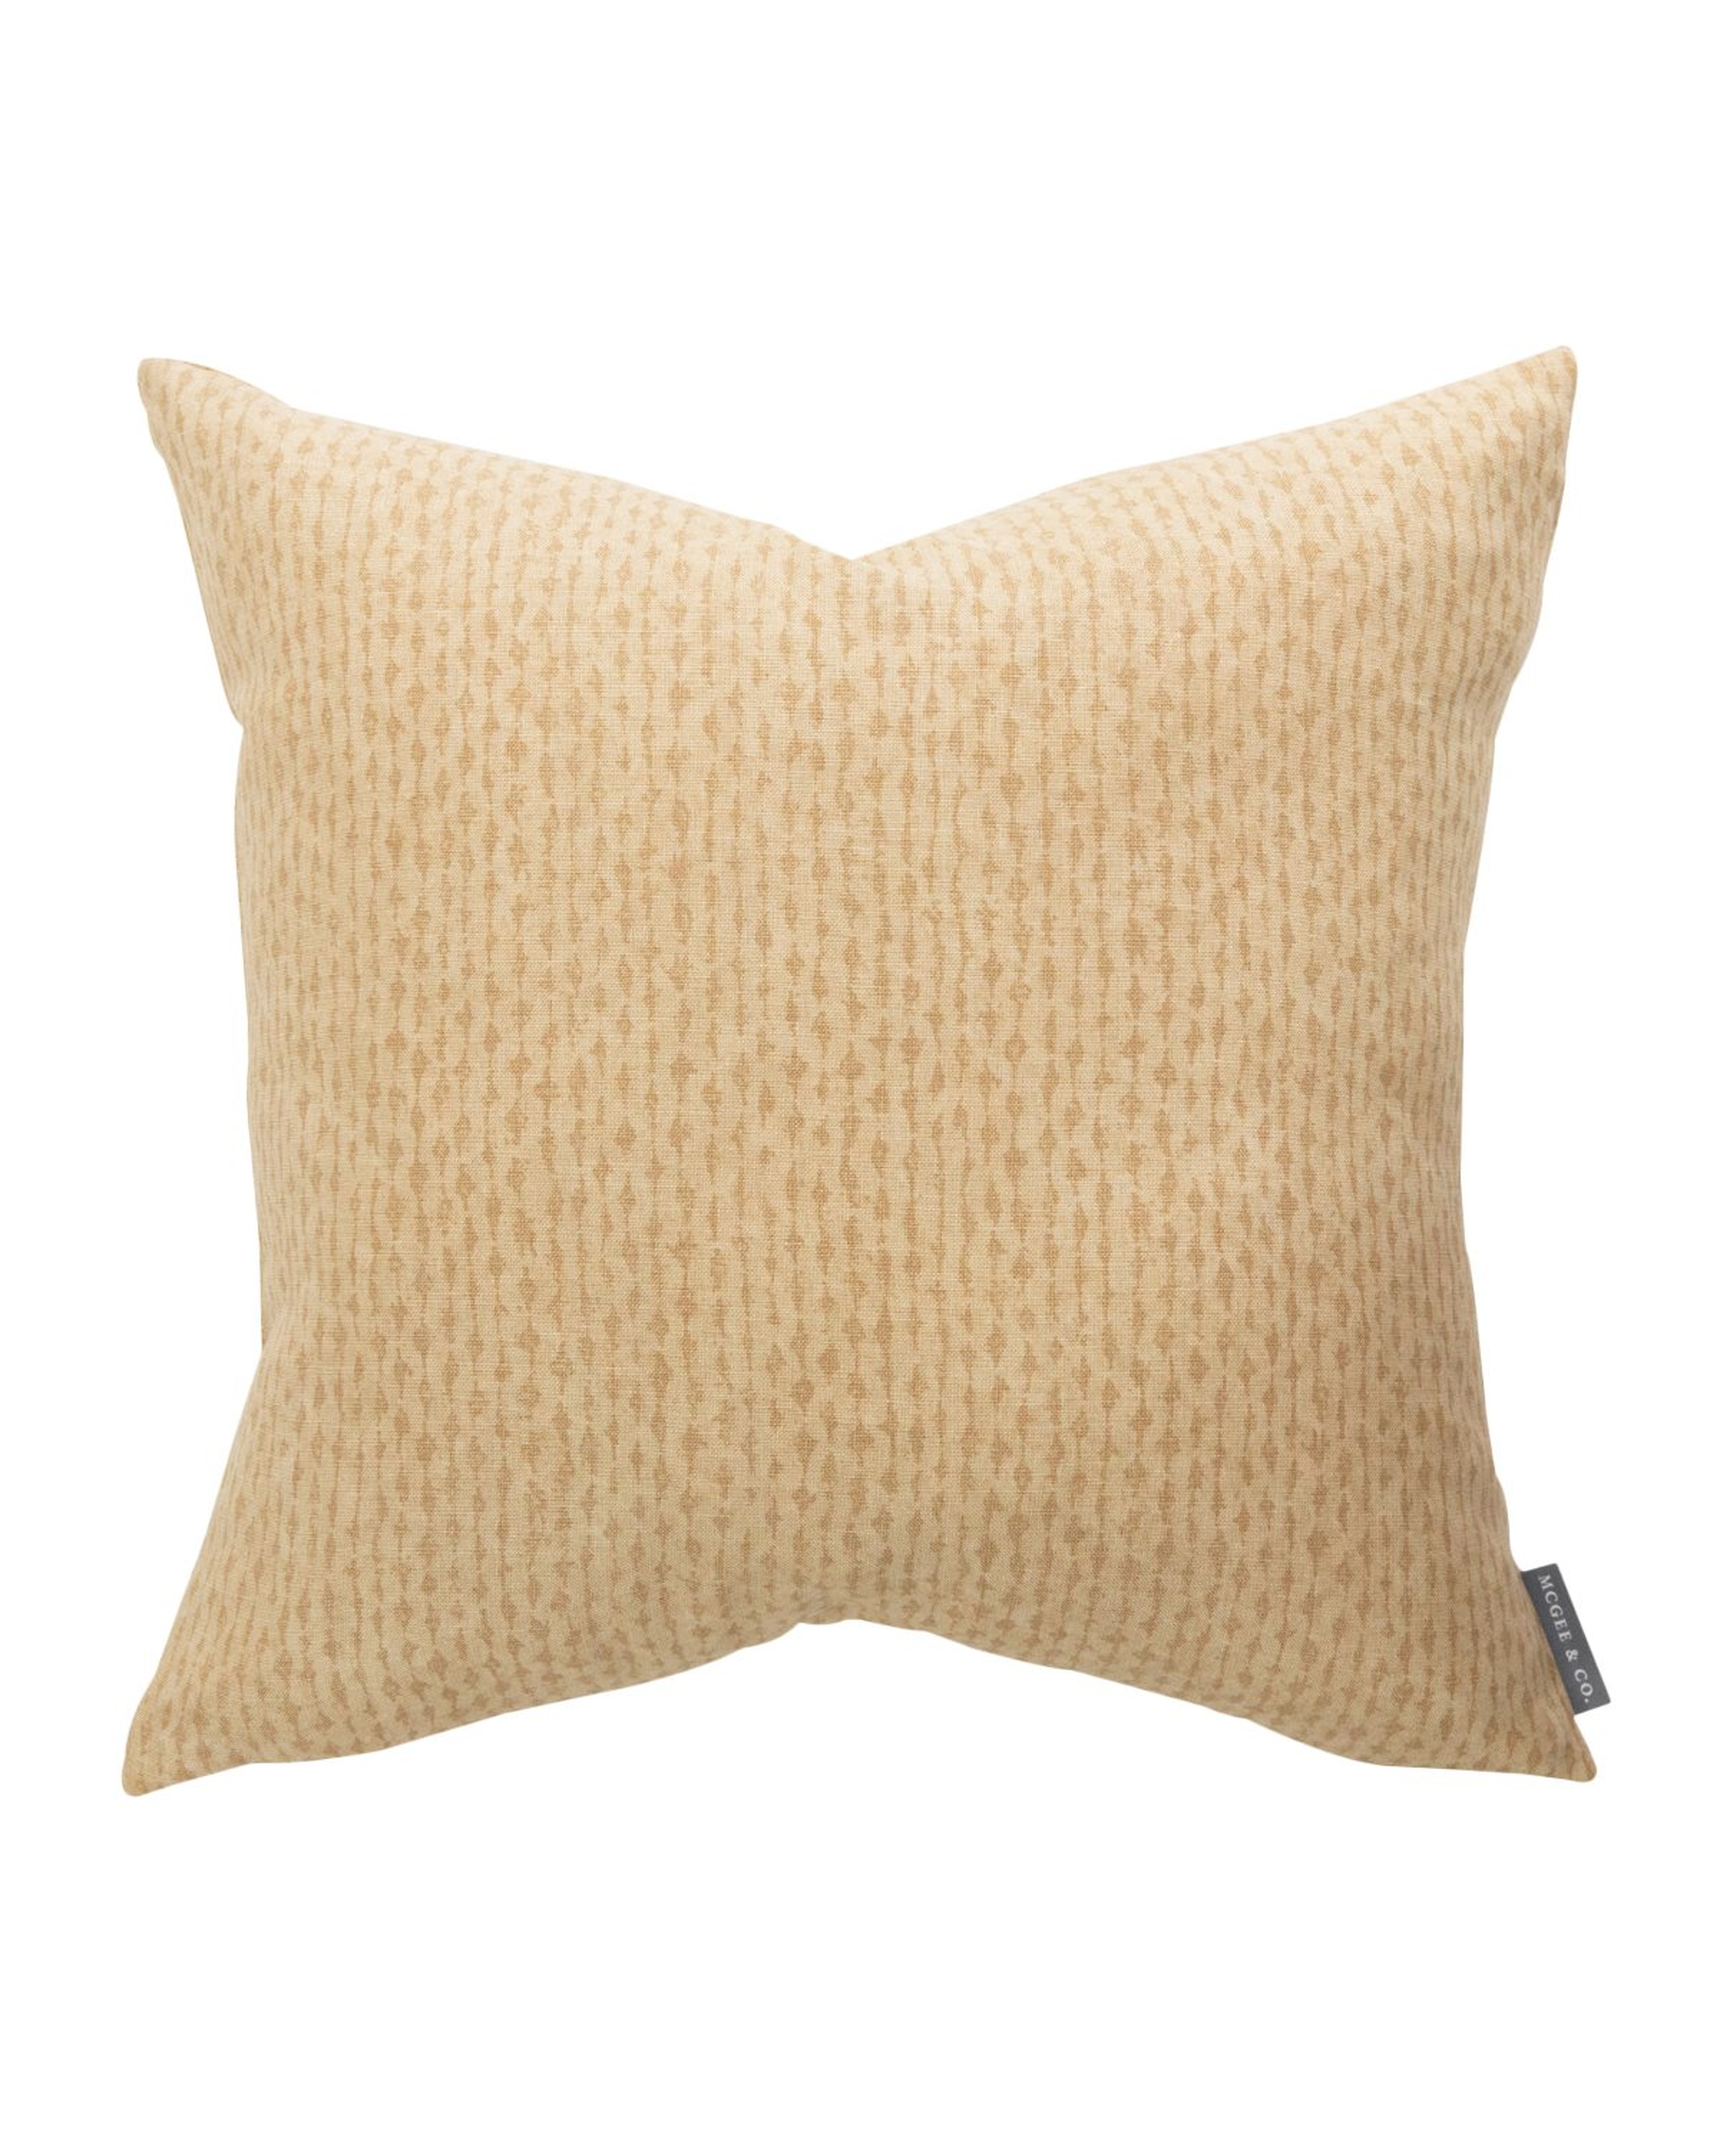 LOTTIE PILLOW WITHOUT INSERT, 20" x 20" - McGee & Co.